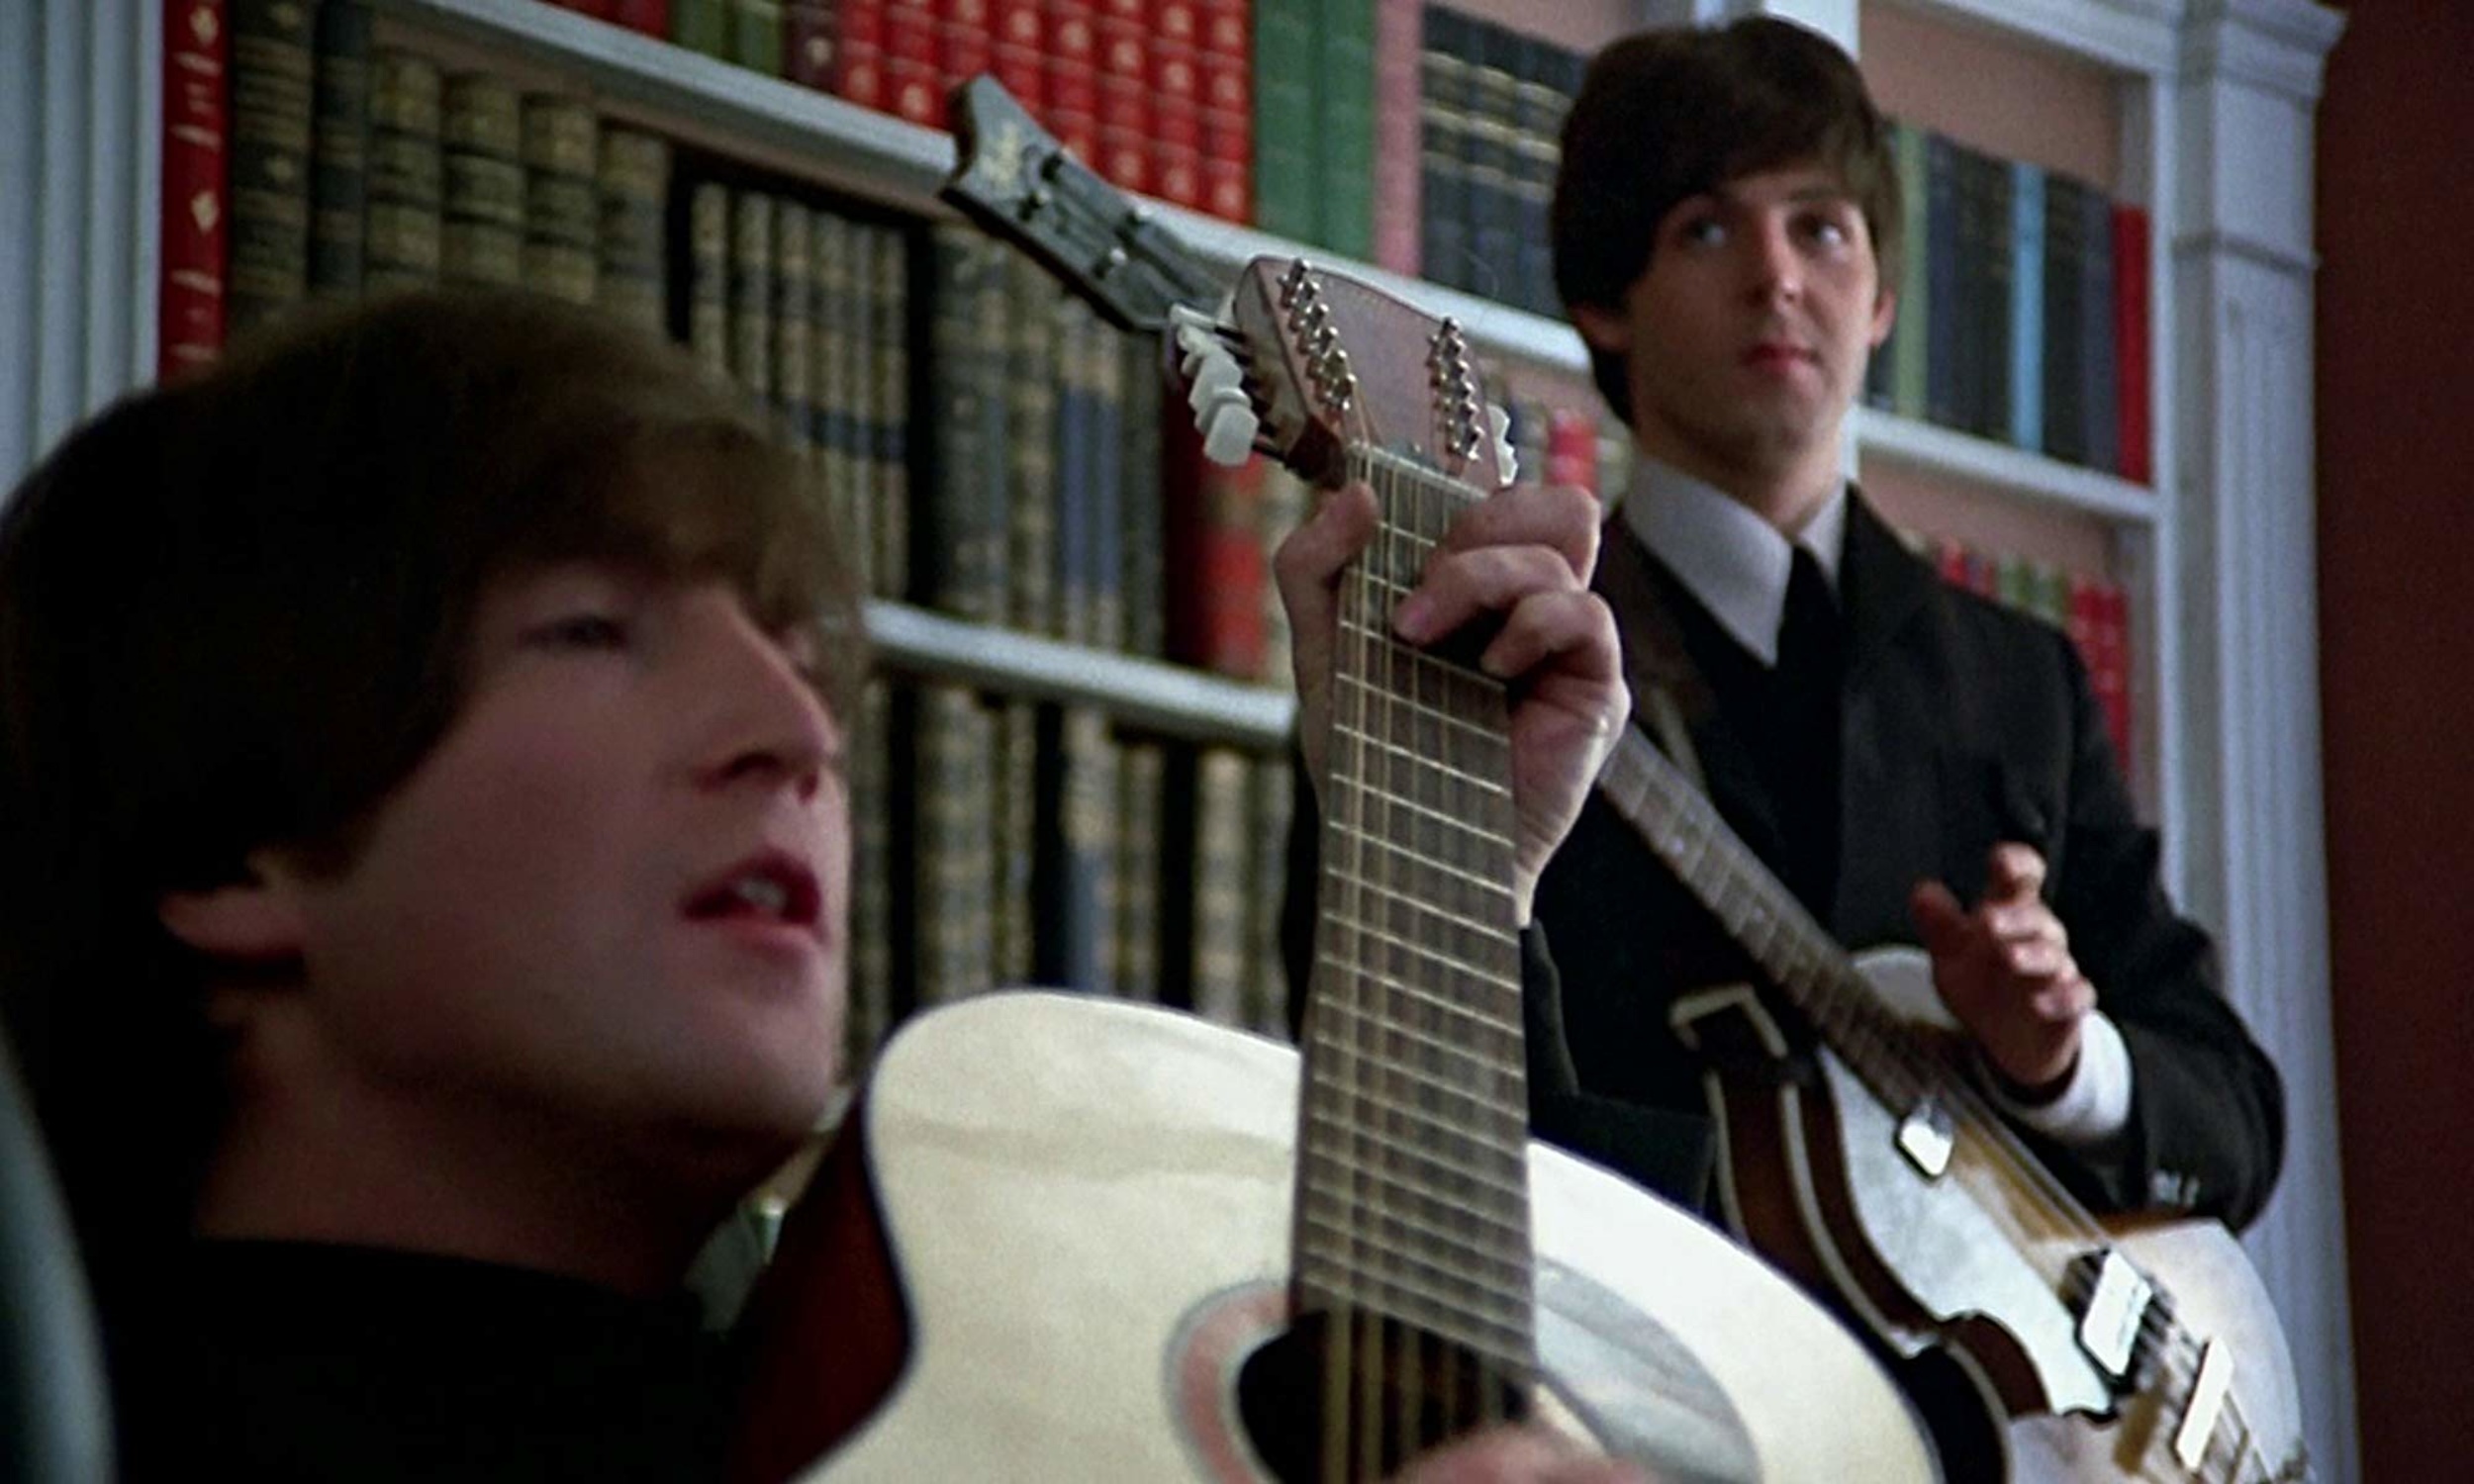 <p>Master of shade, John Lennon, on McCartney’s “Got to Get You into My Life”: “I think that was one of his best songs, too, because the lyrics are good and I didn’t write them.” It’s a classic, upbeat McCartney number with a shot of brass adrenaline from George Martin. Some have read it as an expression of “constipated fury," but McCartney contends that it’s a love song to pot. This tracks.</p><p><a href='https://www.msn.com/en-us/community/channel/vid-cj9pqbr0vn9in2b6ddcd8sfgpfq6x6utp44fssrv6mc2gtybw0us'>Follow us on MSN to see more of our exclusive entertainment content.</a></p>